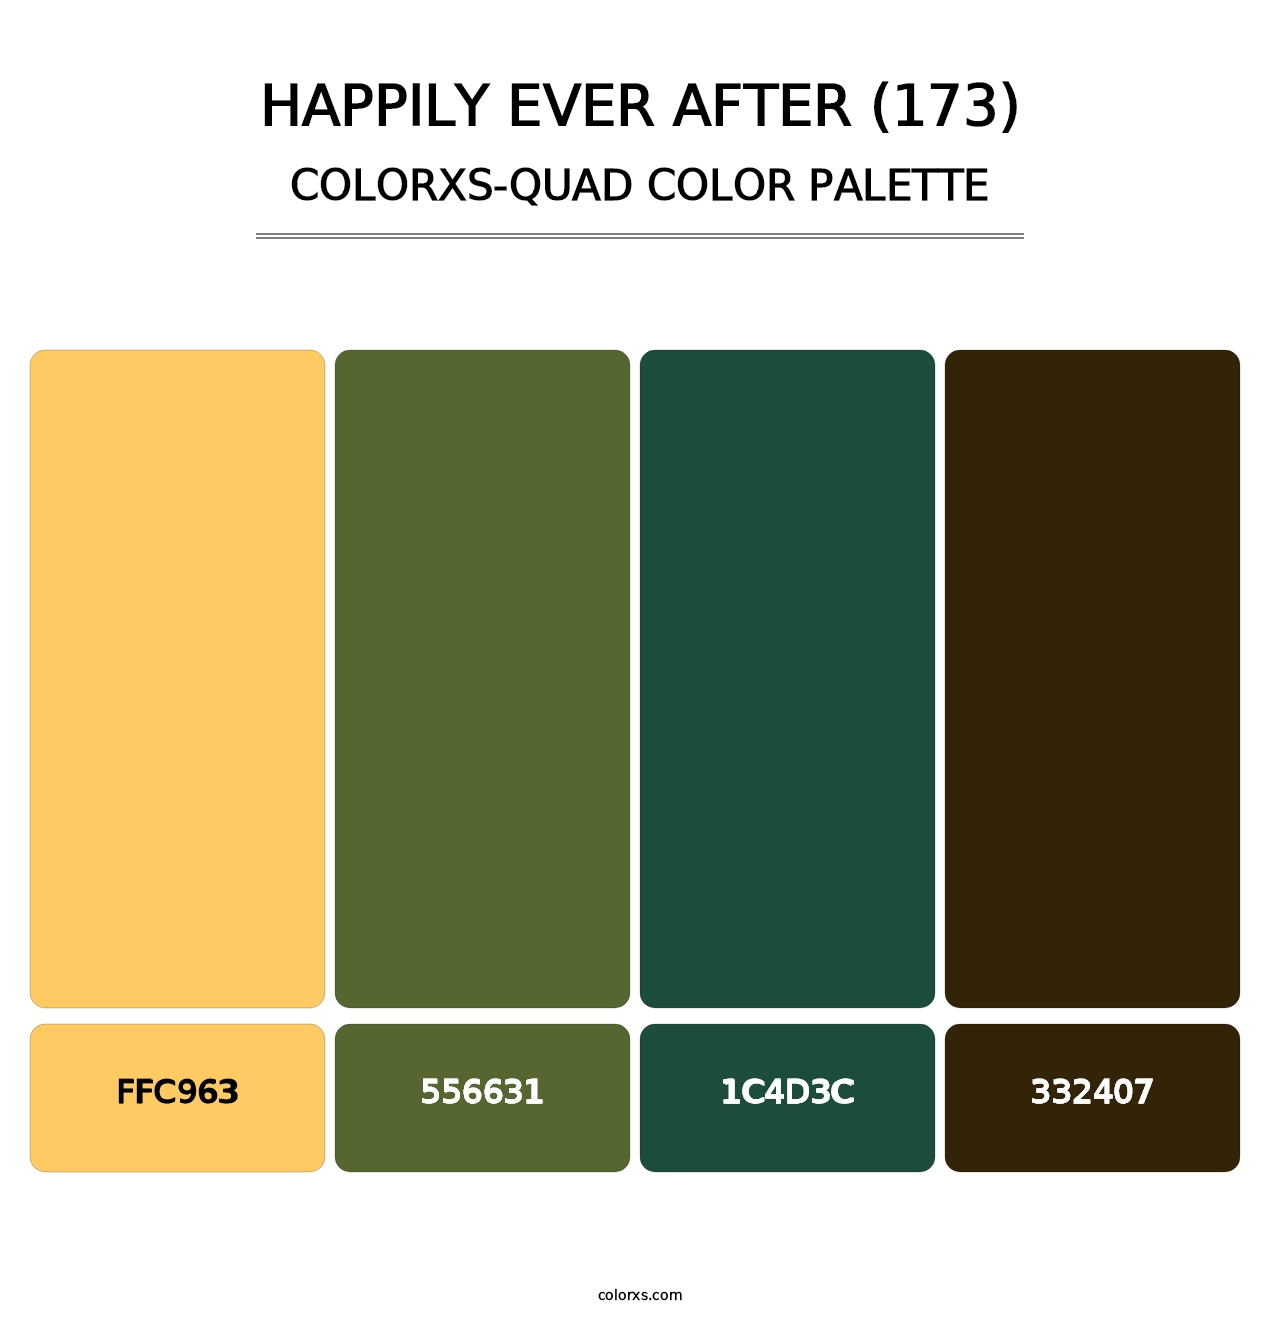 Happily Ever After (173) - Colorxs Quad Palette